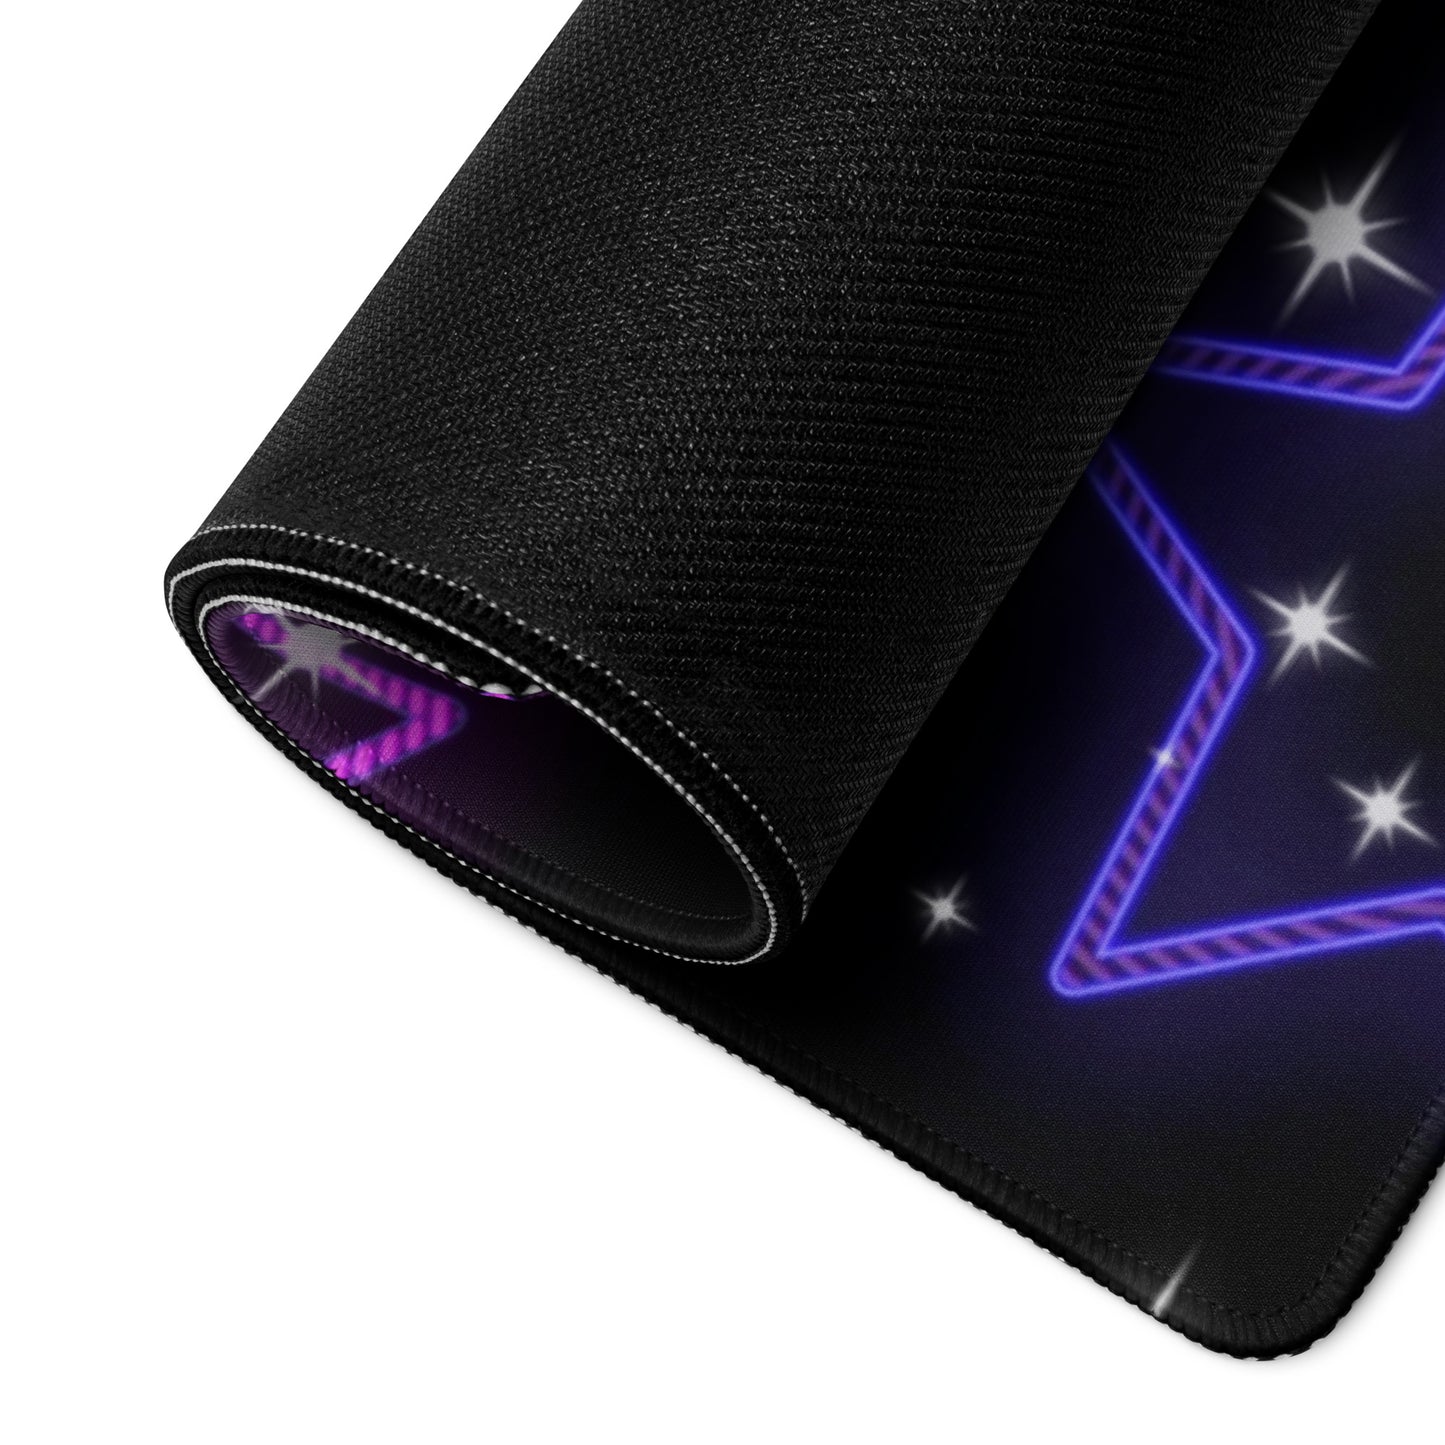 Neon Star Gaming Mouse Pad